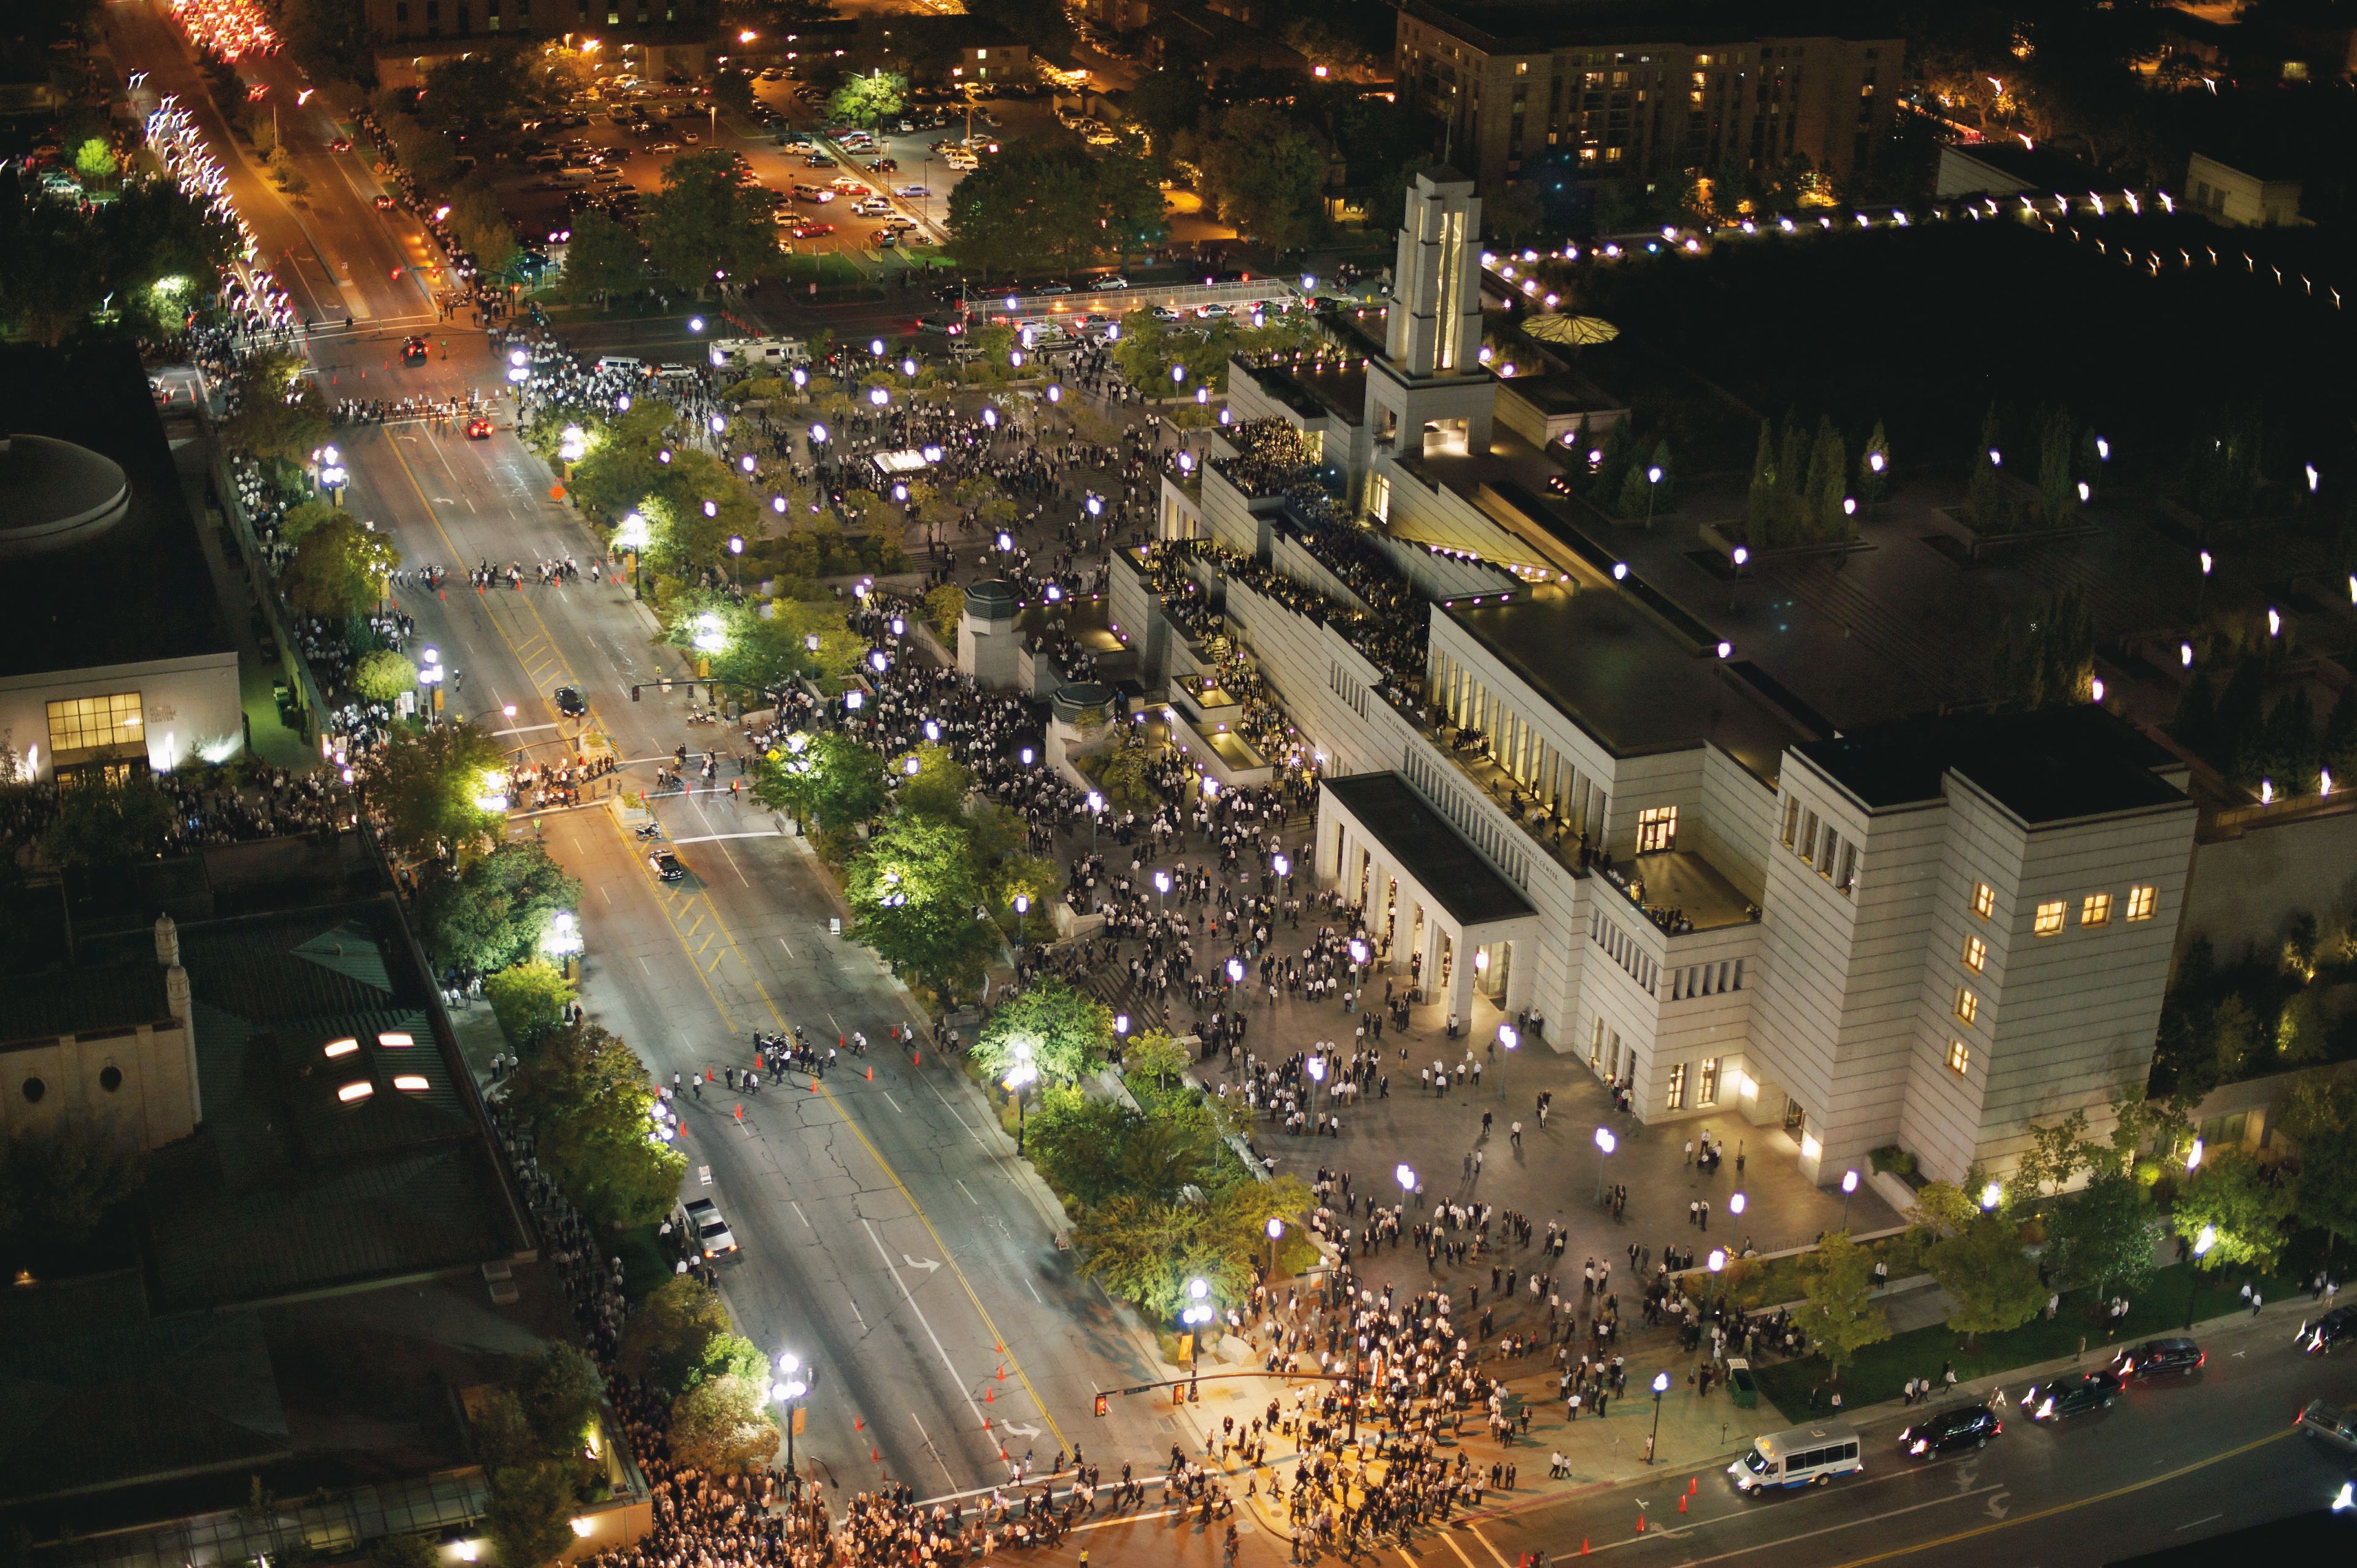 An aerial view of the Conference Center at night.